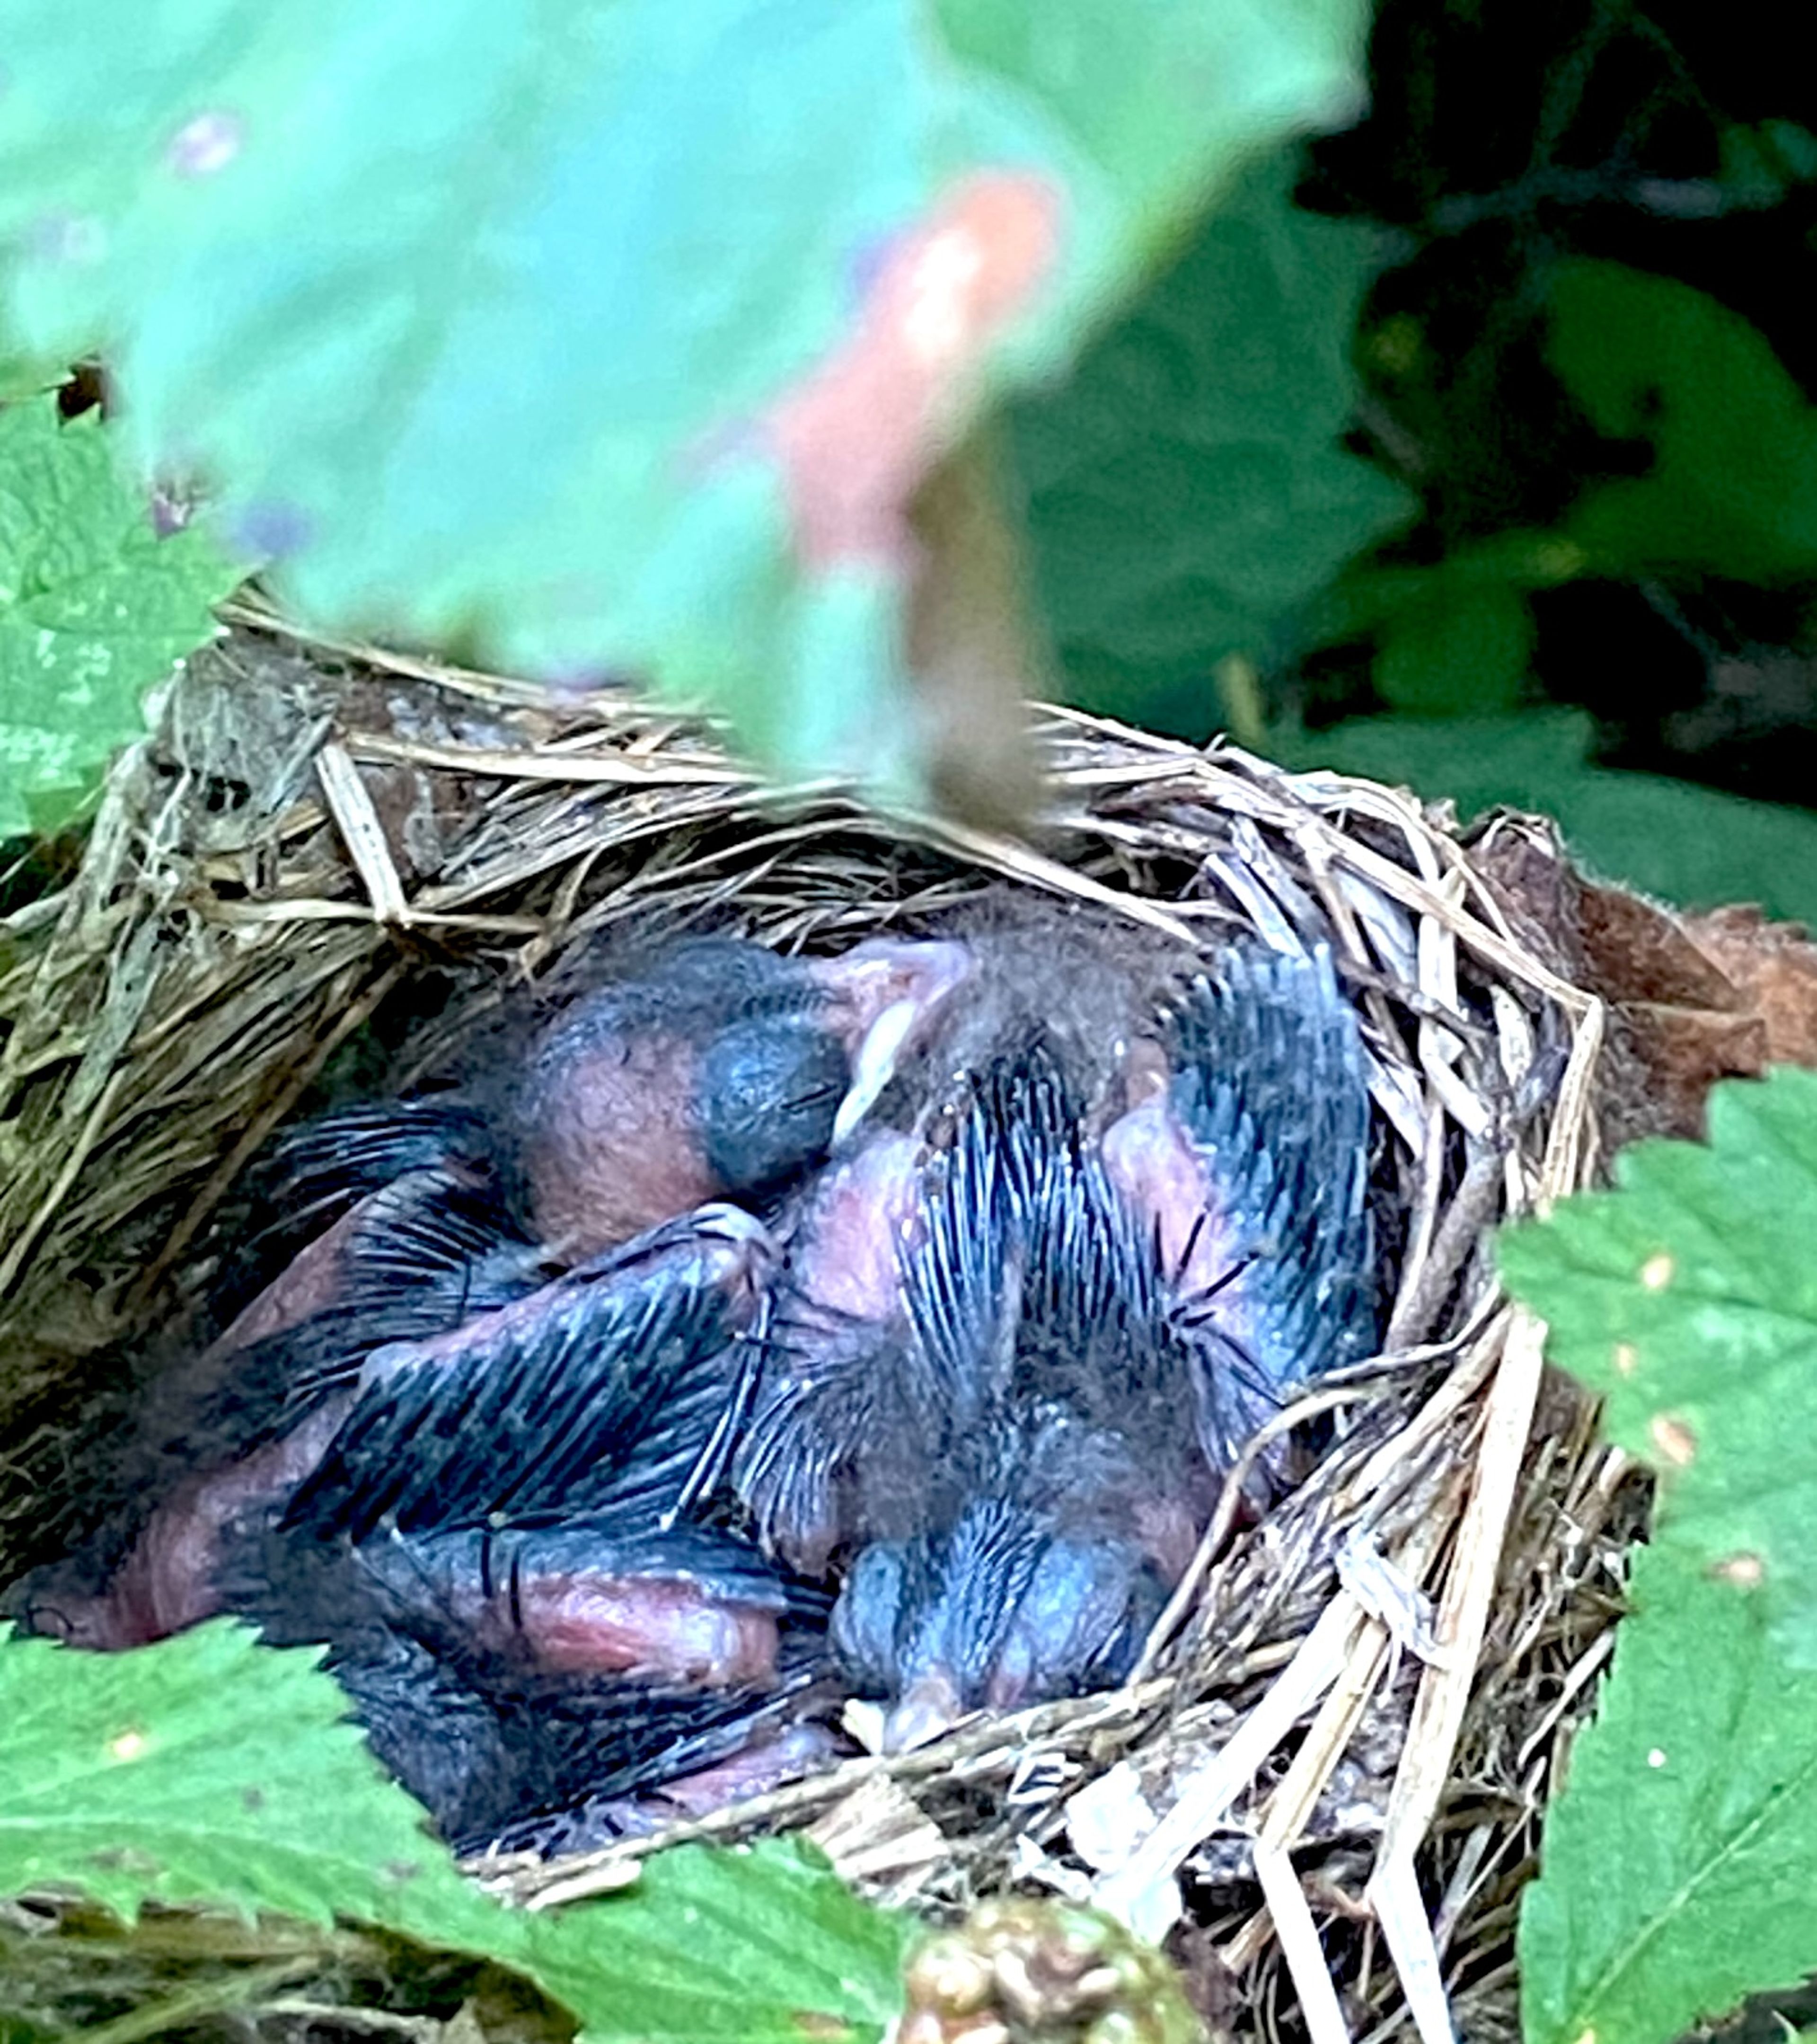 
Baby birds nap in Barb Bailey's blackberry patch near Marble Hill. 'My husband pointed this out to me while we were picking blackberries,' Bailey said. 'I had to take a picture!'